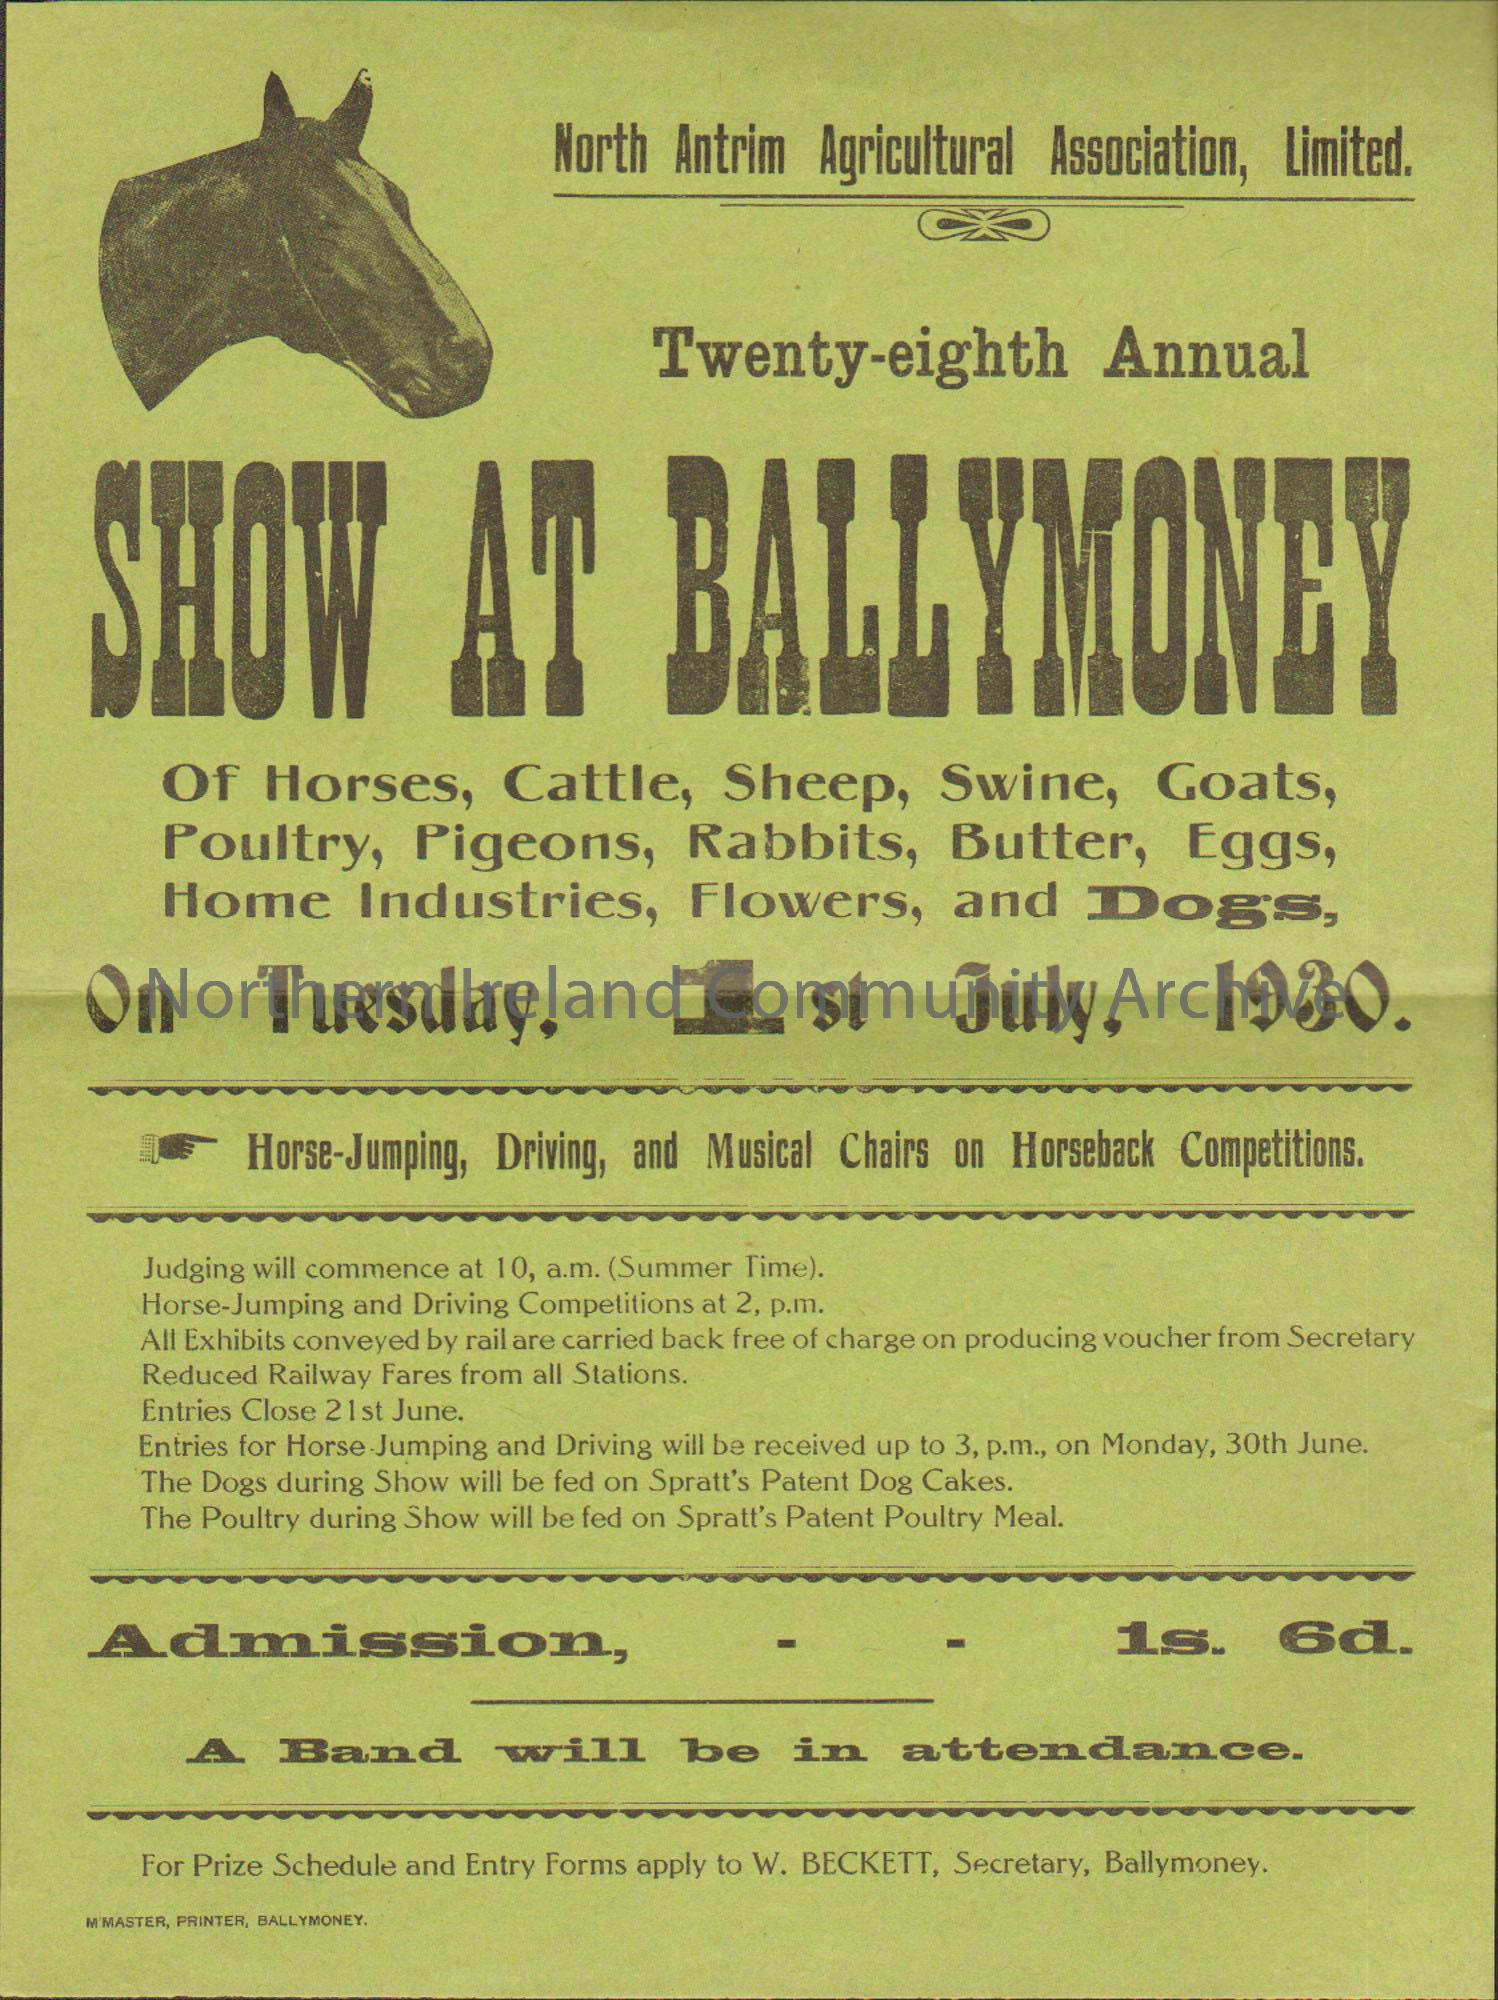 Green poster produced by the North Antrim Agricultural Association, Limited, advertising 28th annual Show at Ballymoney on Tuesday 1st July 1930. Post…